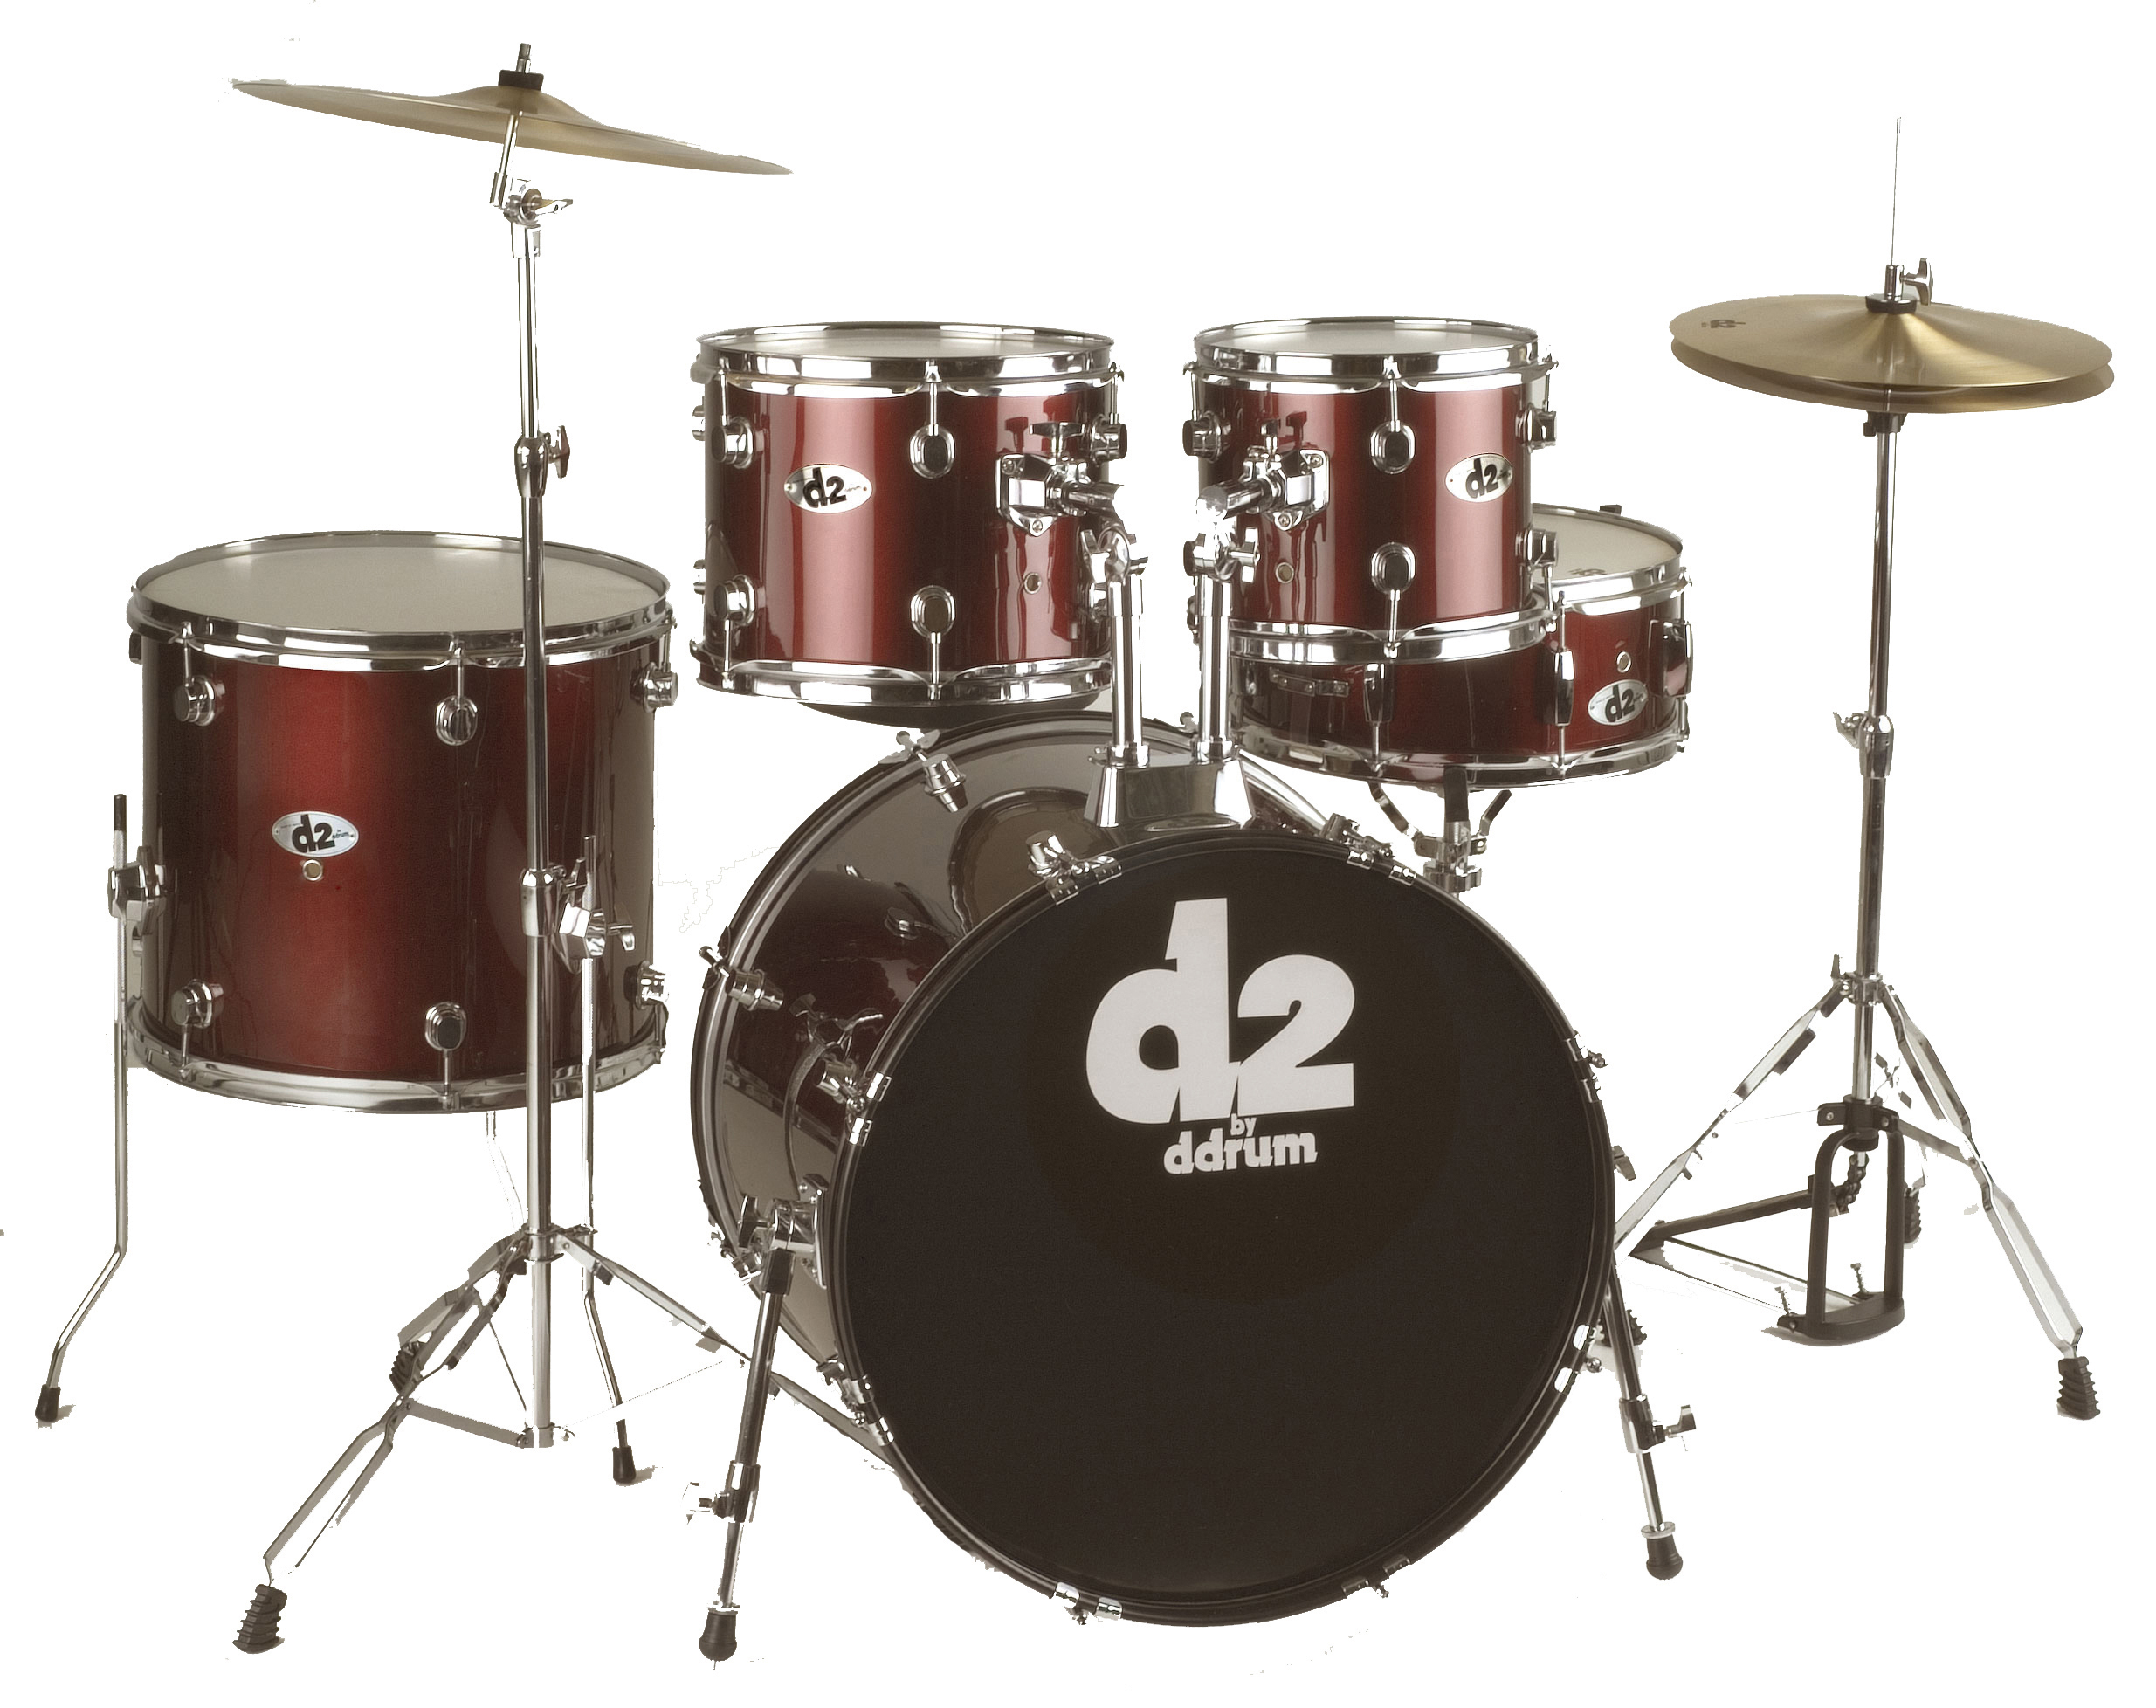 DDrum ddrum D2 Drum Kit with Phat Wrap, 5-Piece - Police Blue